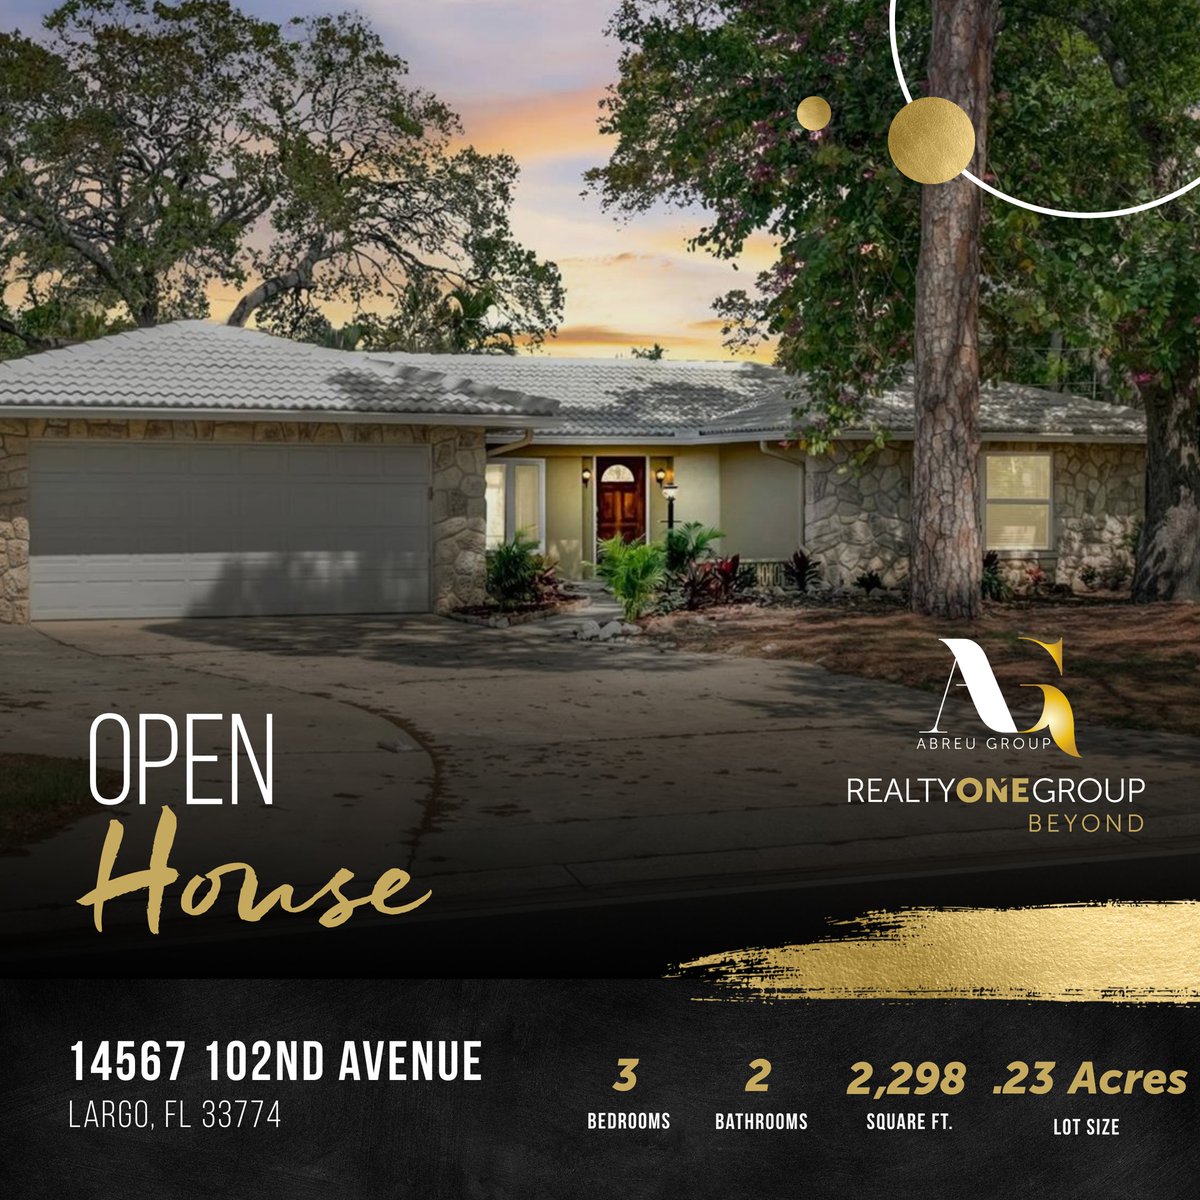 🌟 Step into luxury living at our Open House on March 14th from 12-3 at this Bay Hills gem in Largo, FL! Immerse yourself in the charm and comfort of this 3-bed, 2-bath beauty. Contact the Abreu Group today! 🏡✨ 

#LuxuryRealEstate #OpenHouseEvent #DreamHome #AbreuGroup